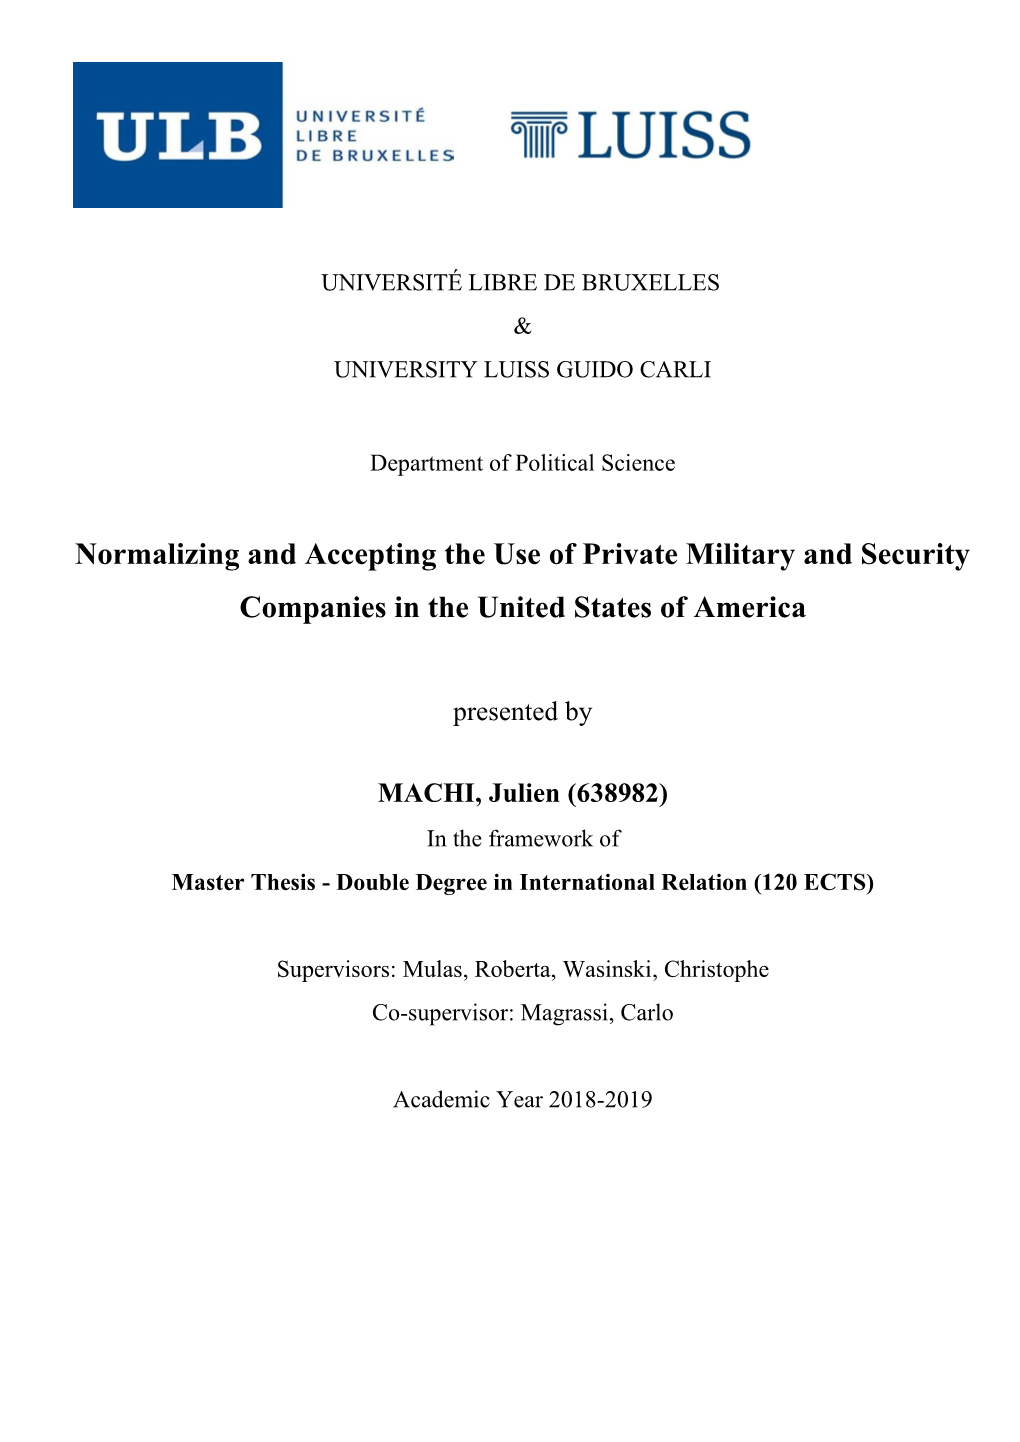 Normalizing and Accepting the Use of Private Military and Security Companies in the United States of America